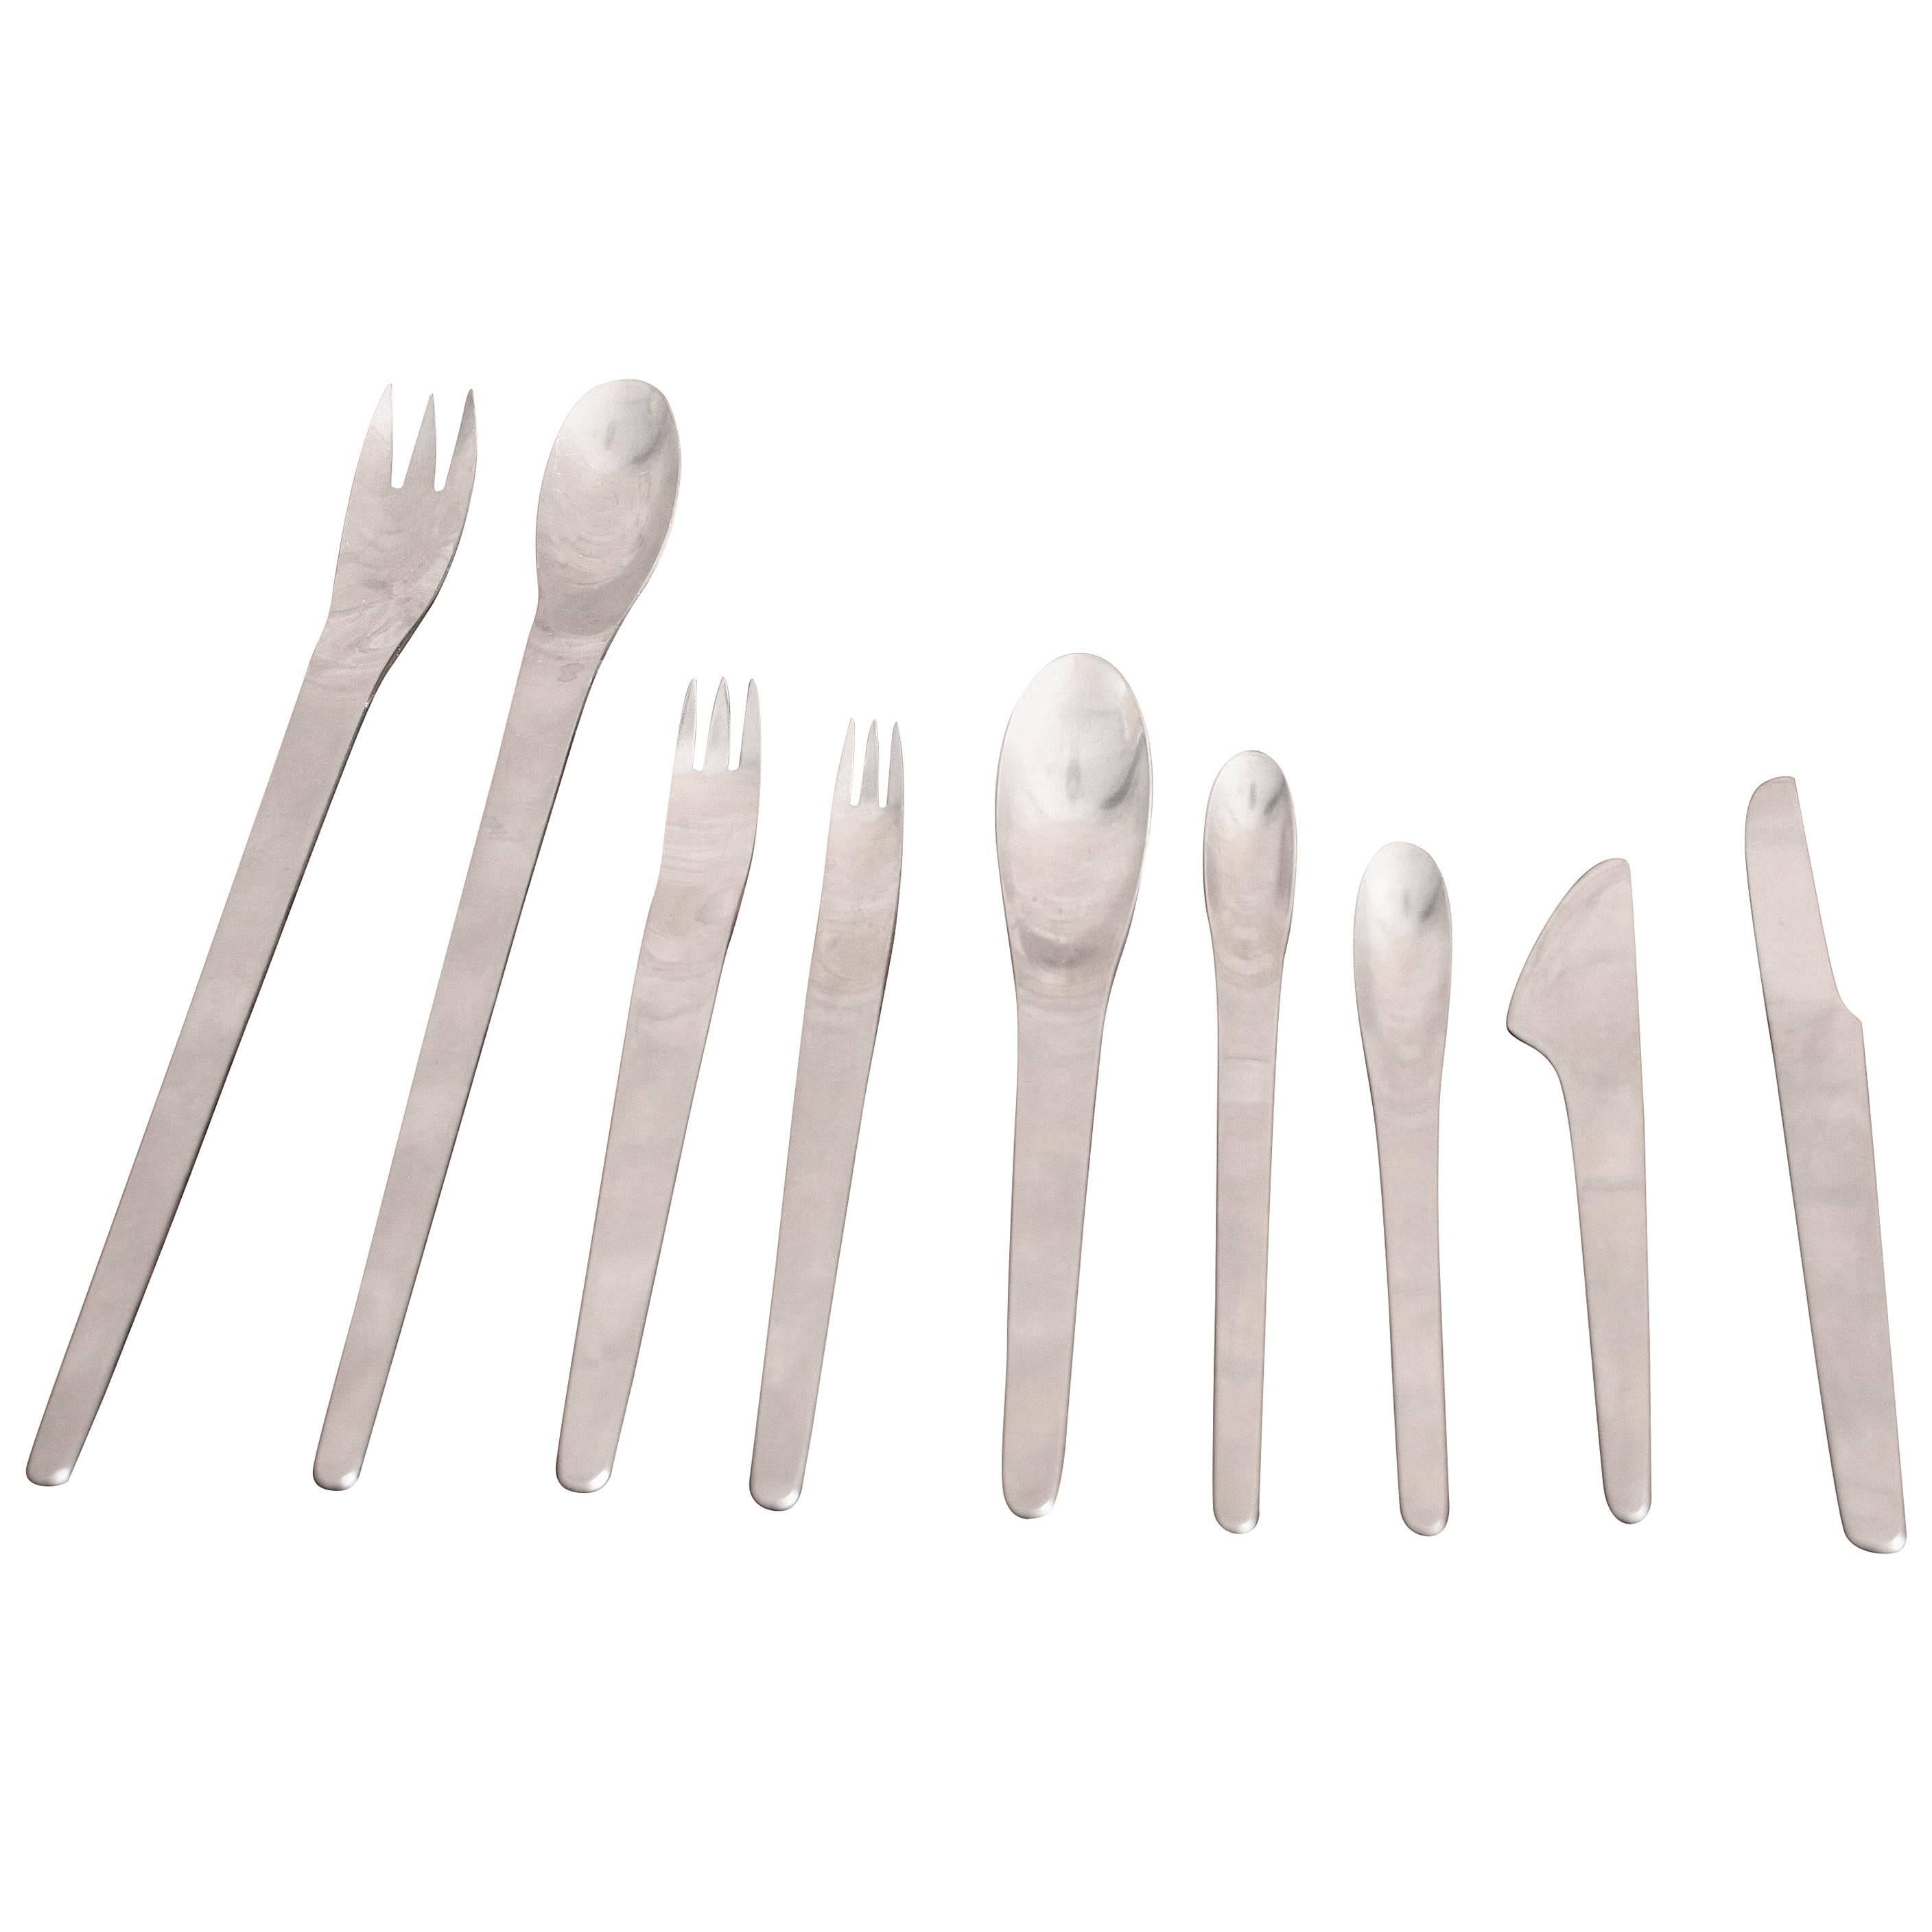 Early and Complete Set of AJ Flatware by Arne Jacobsen for A. Michelsen, Denmark For Sale